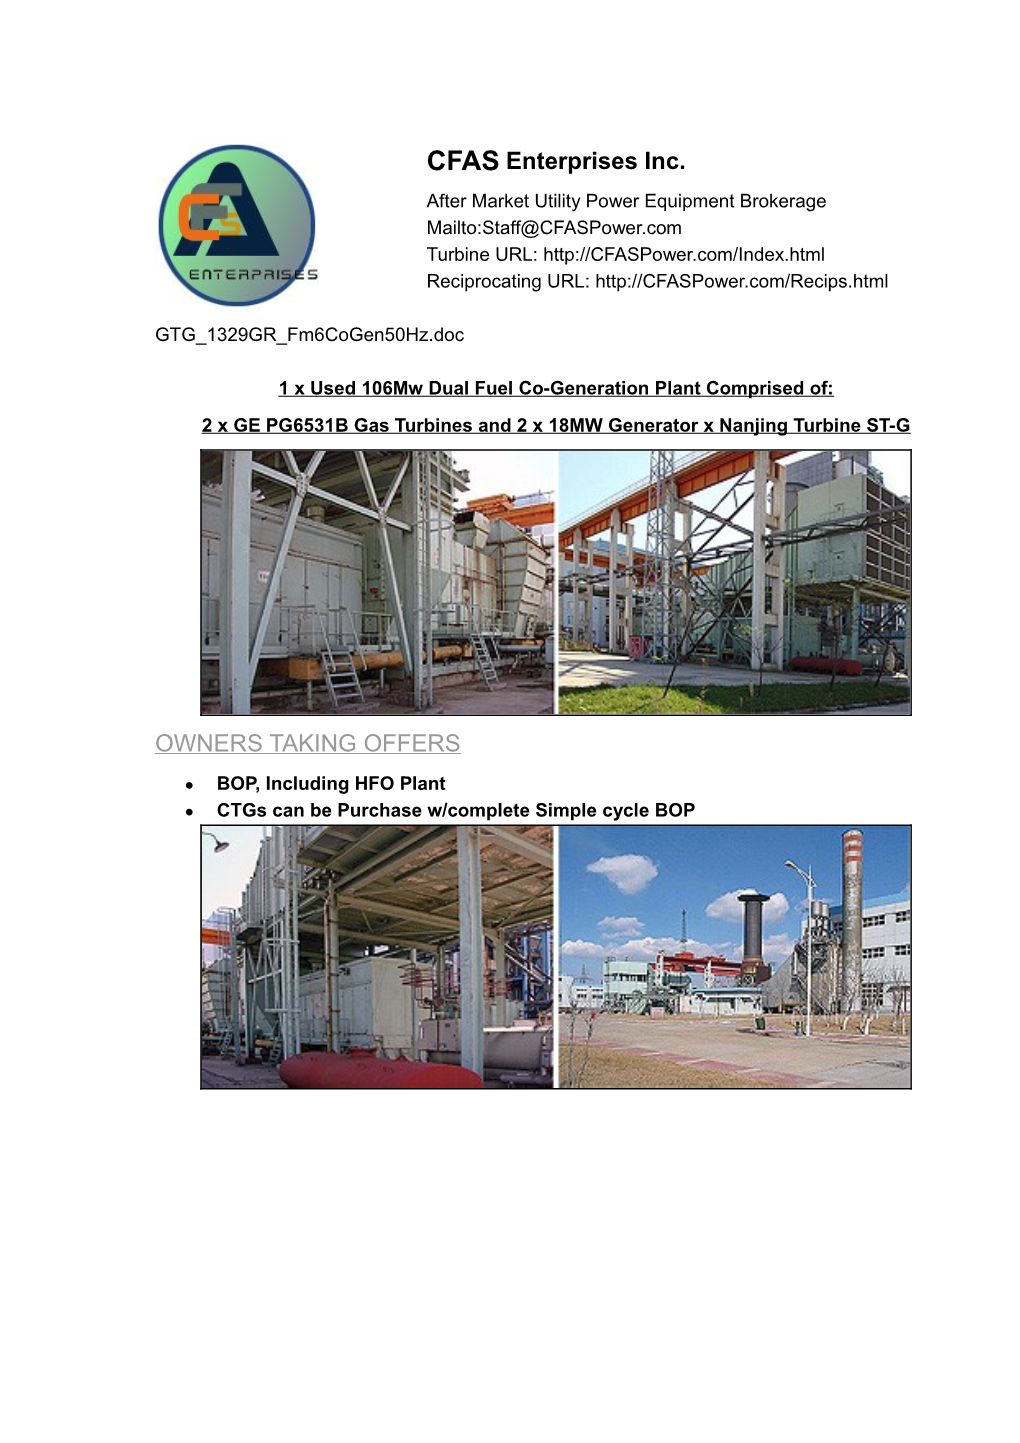 1 X Used 106Mw Dual Fuel Co-Generation Plant Comprised Of